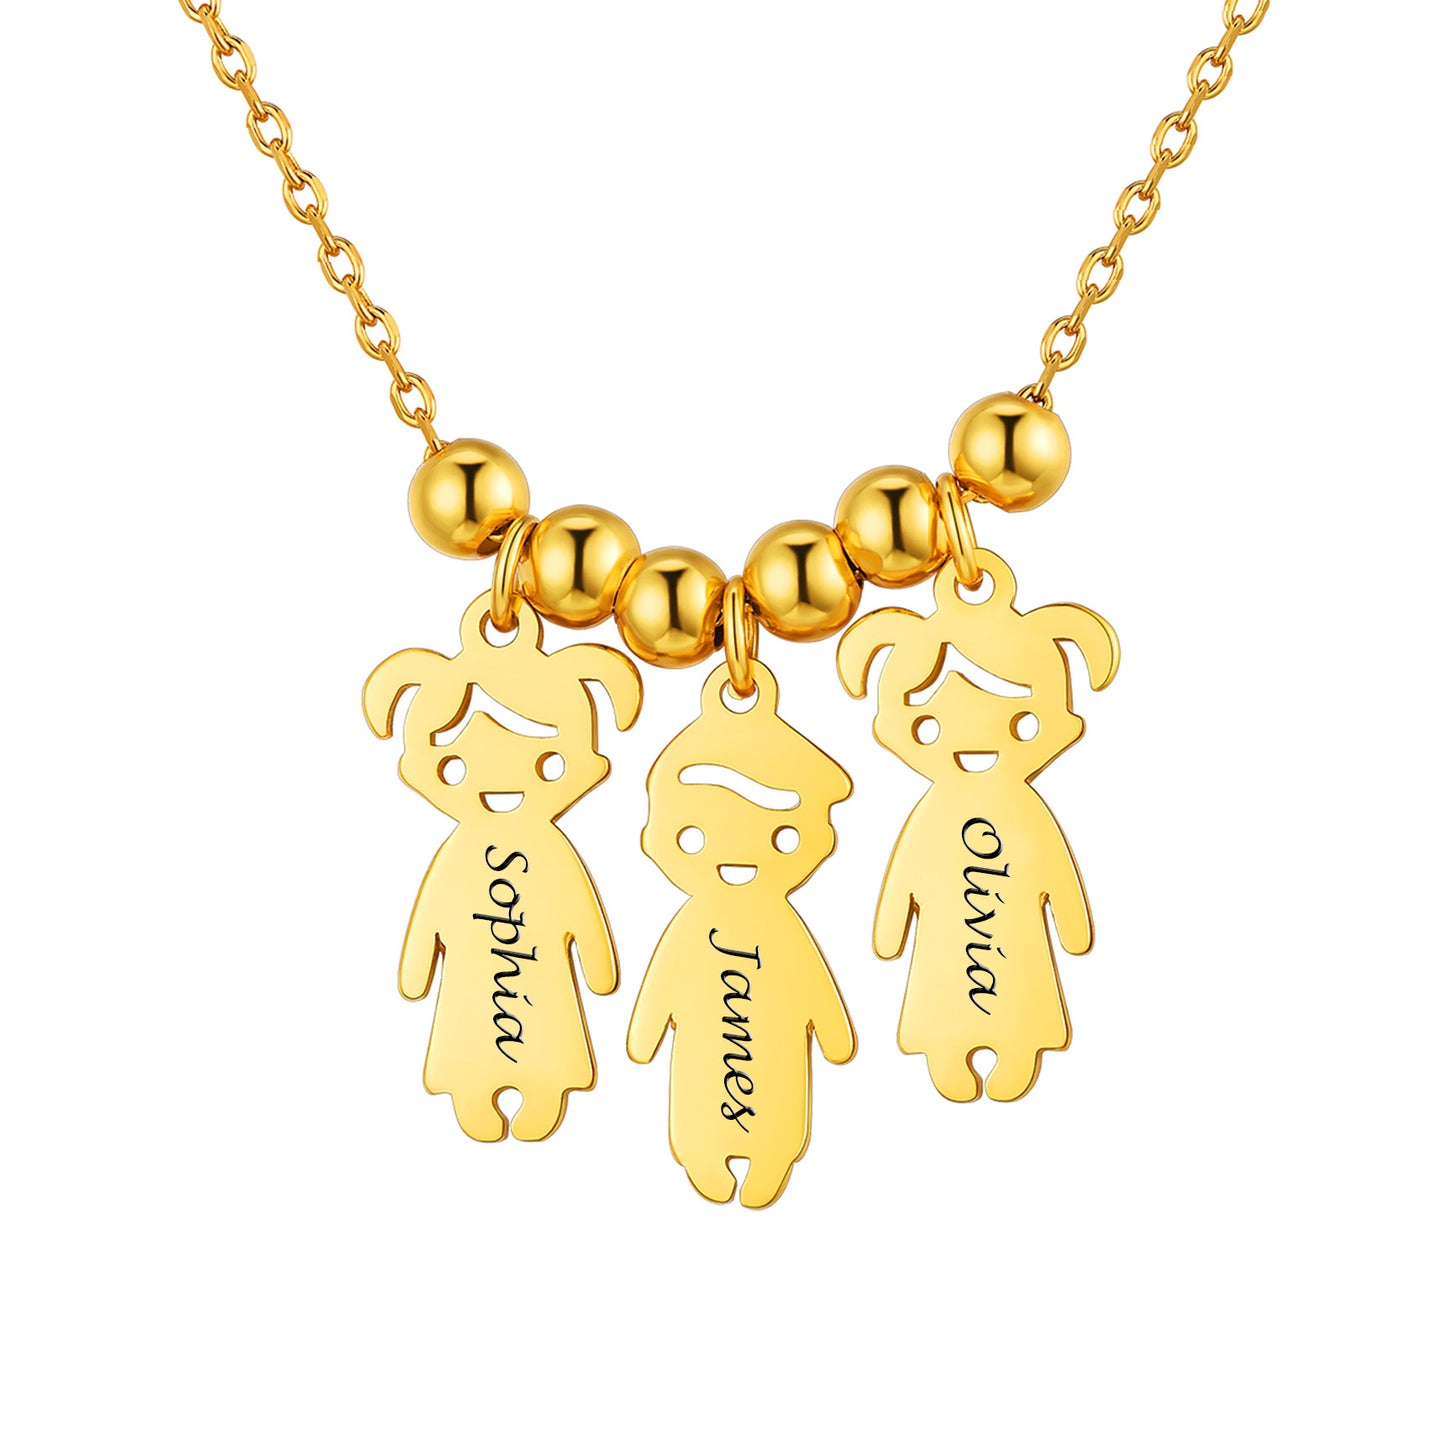 Gold 3 children necklace for mom